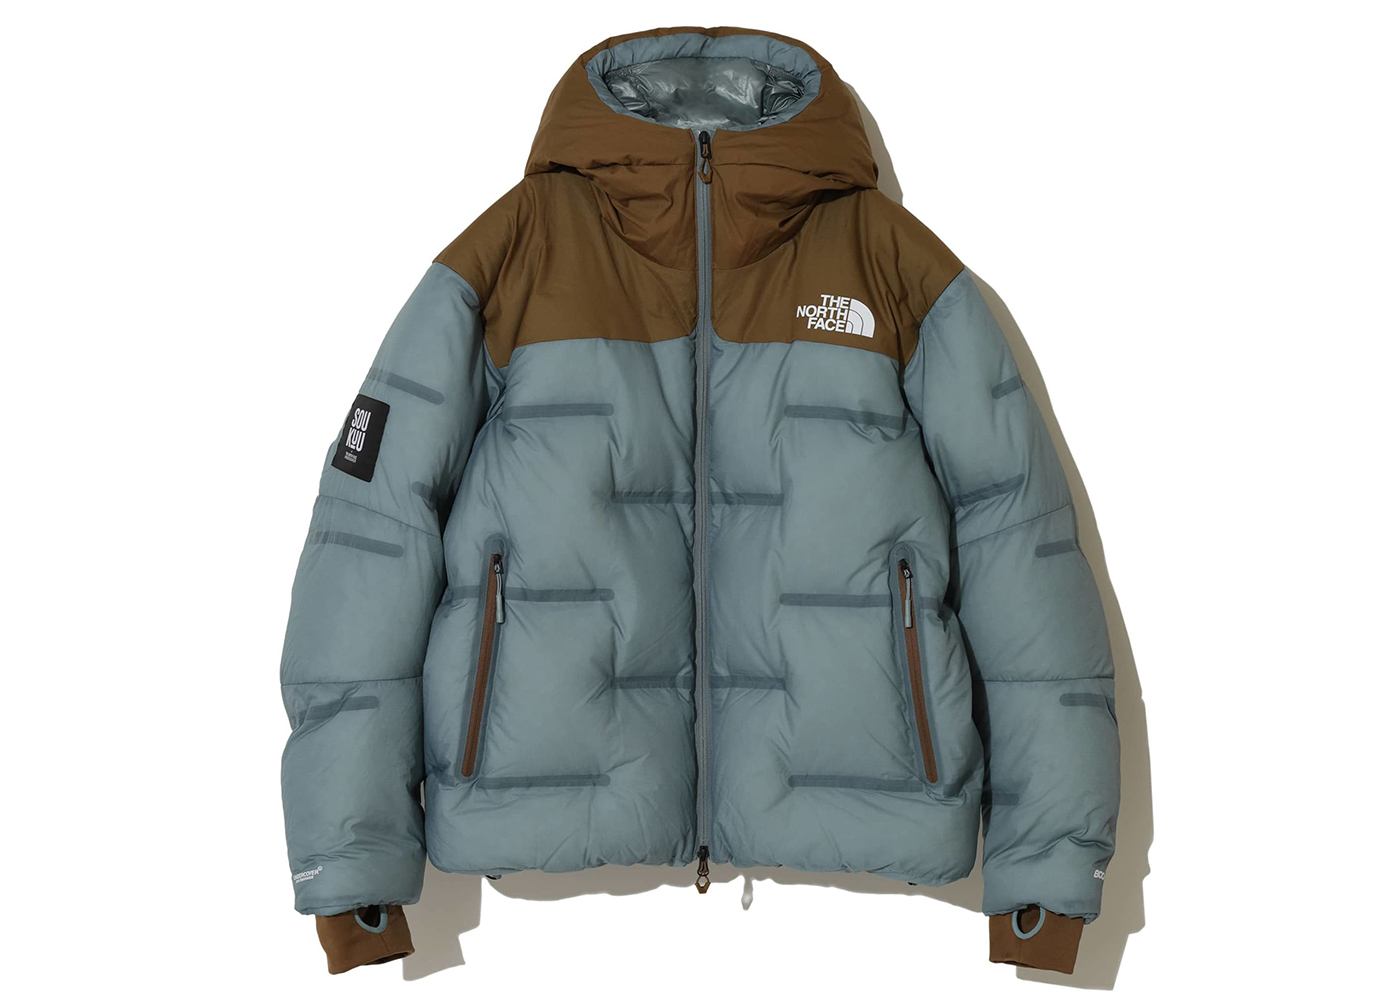 UNDERCOVER x THE NORTH FACE Jacketレシートを付ける